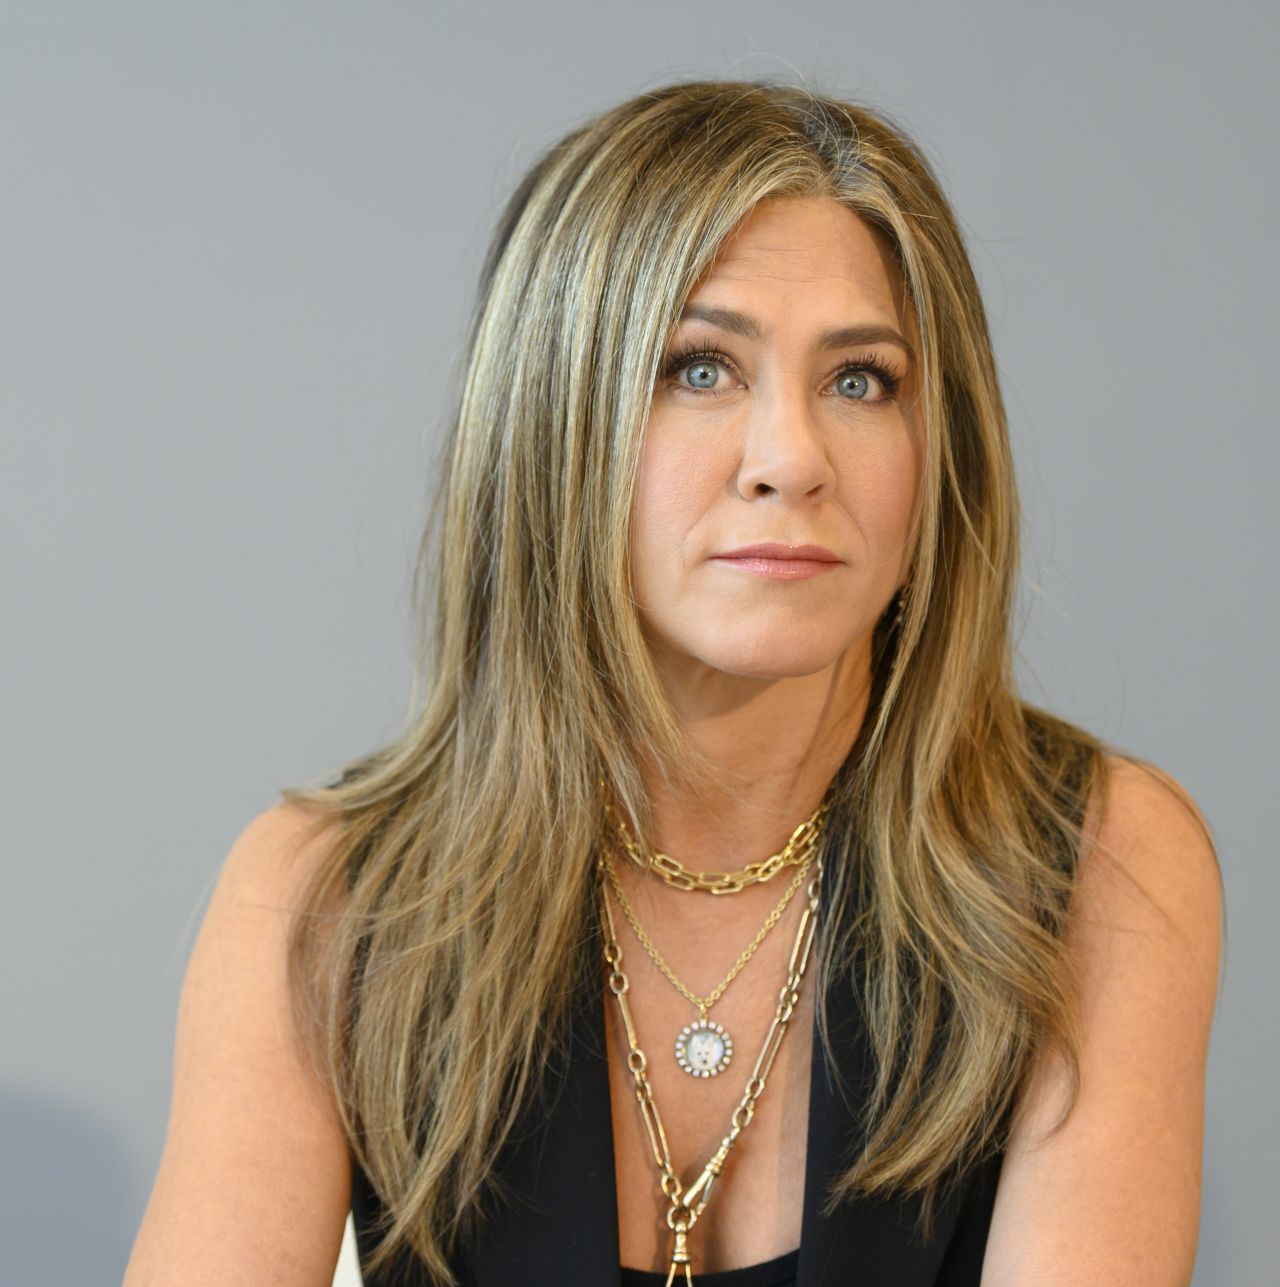 Jennifer Aniston "The Morning Show" Press Conference in West